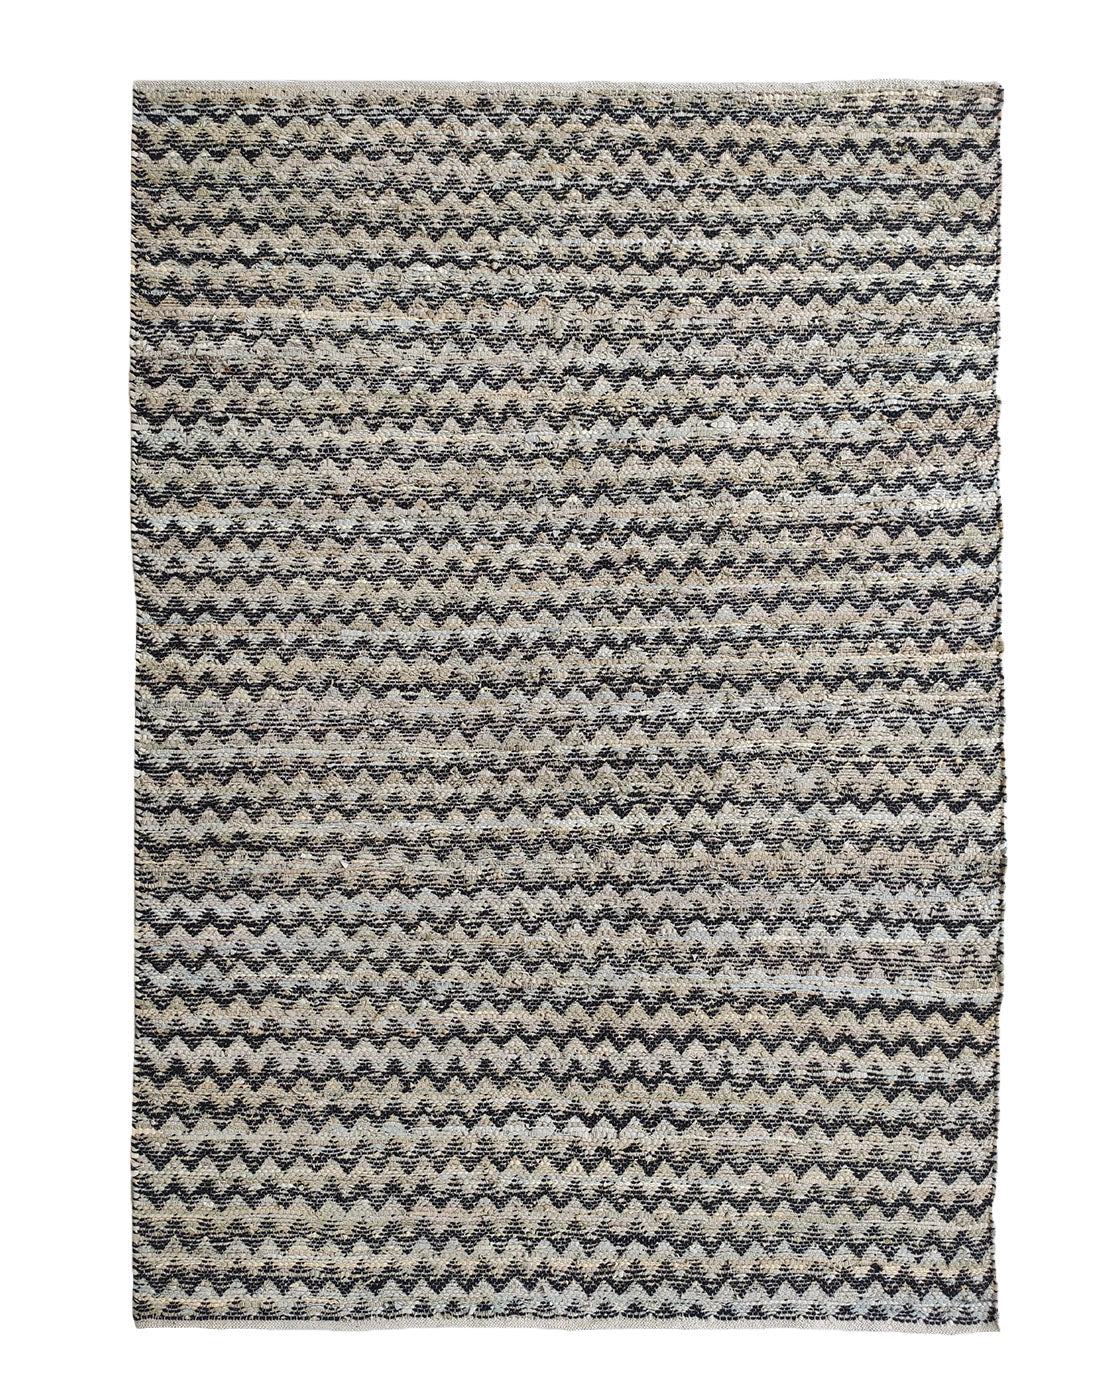 Hand Made Beige & White Woven Rug Rectangle Shape (2 Sizes)